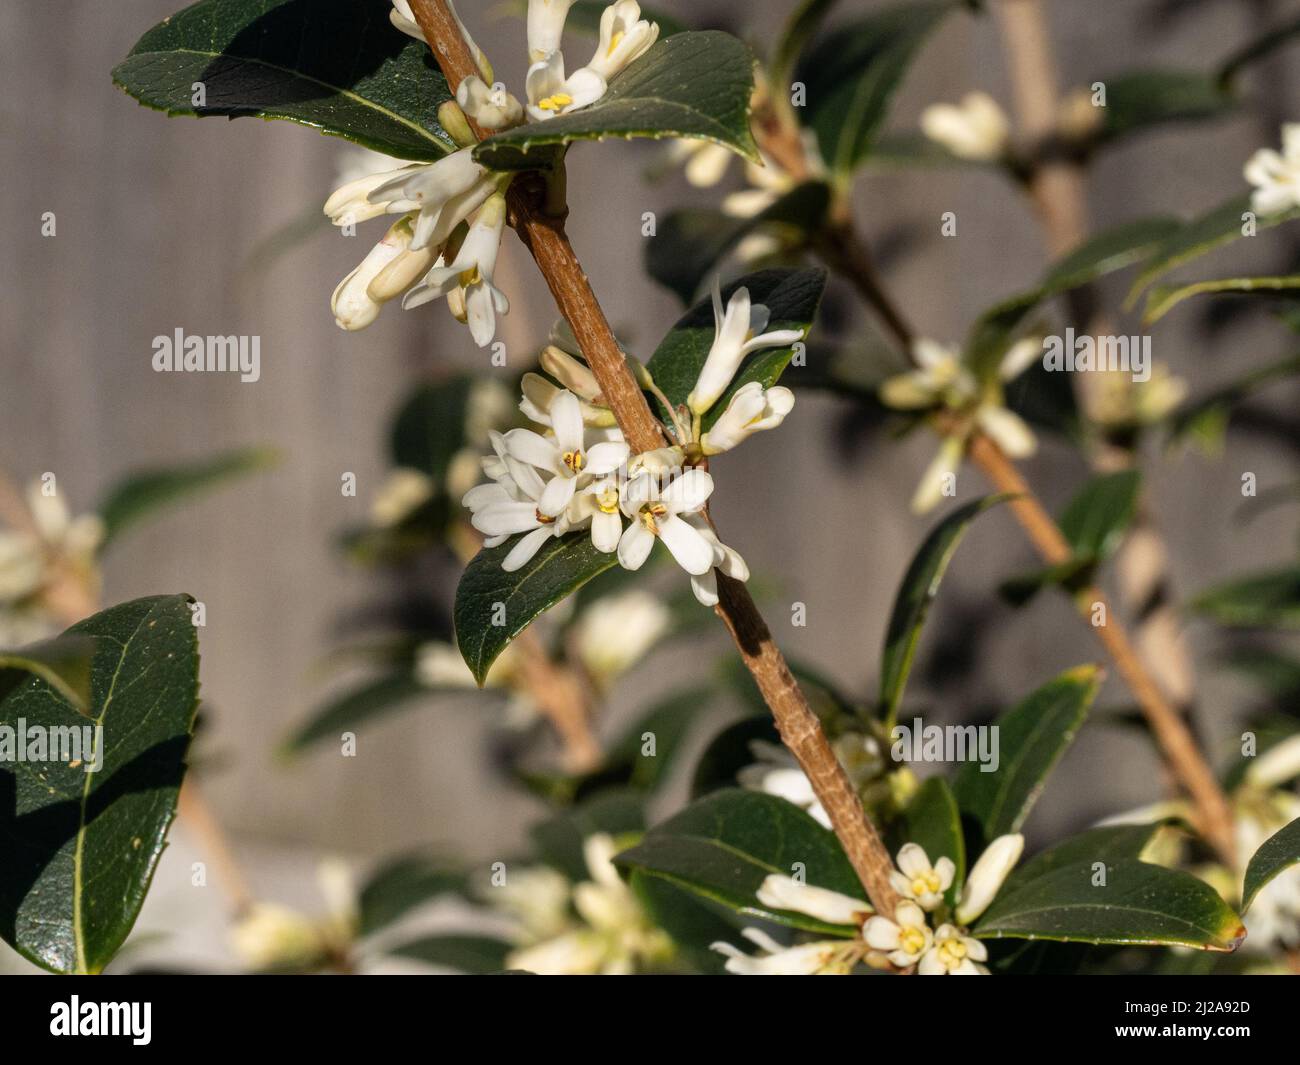 A close up of the pure white flowers and dark green leaves of Osmanthus burkwoodii Stock Photo